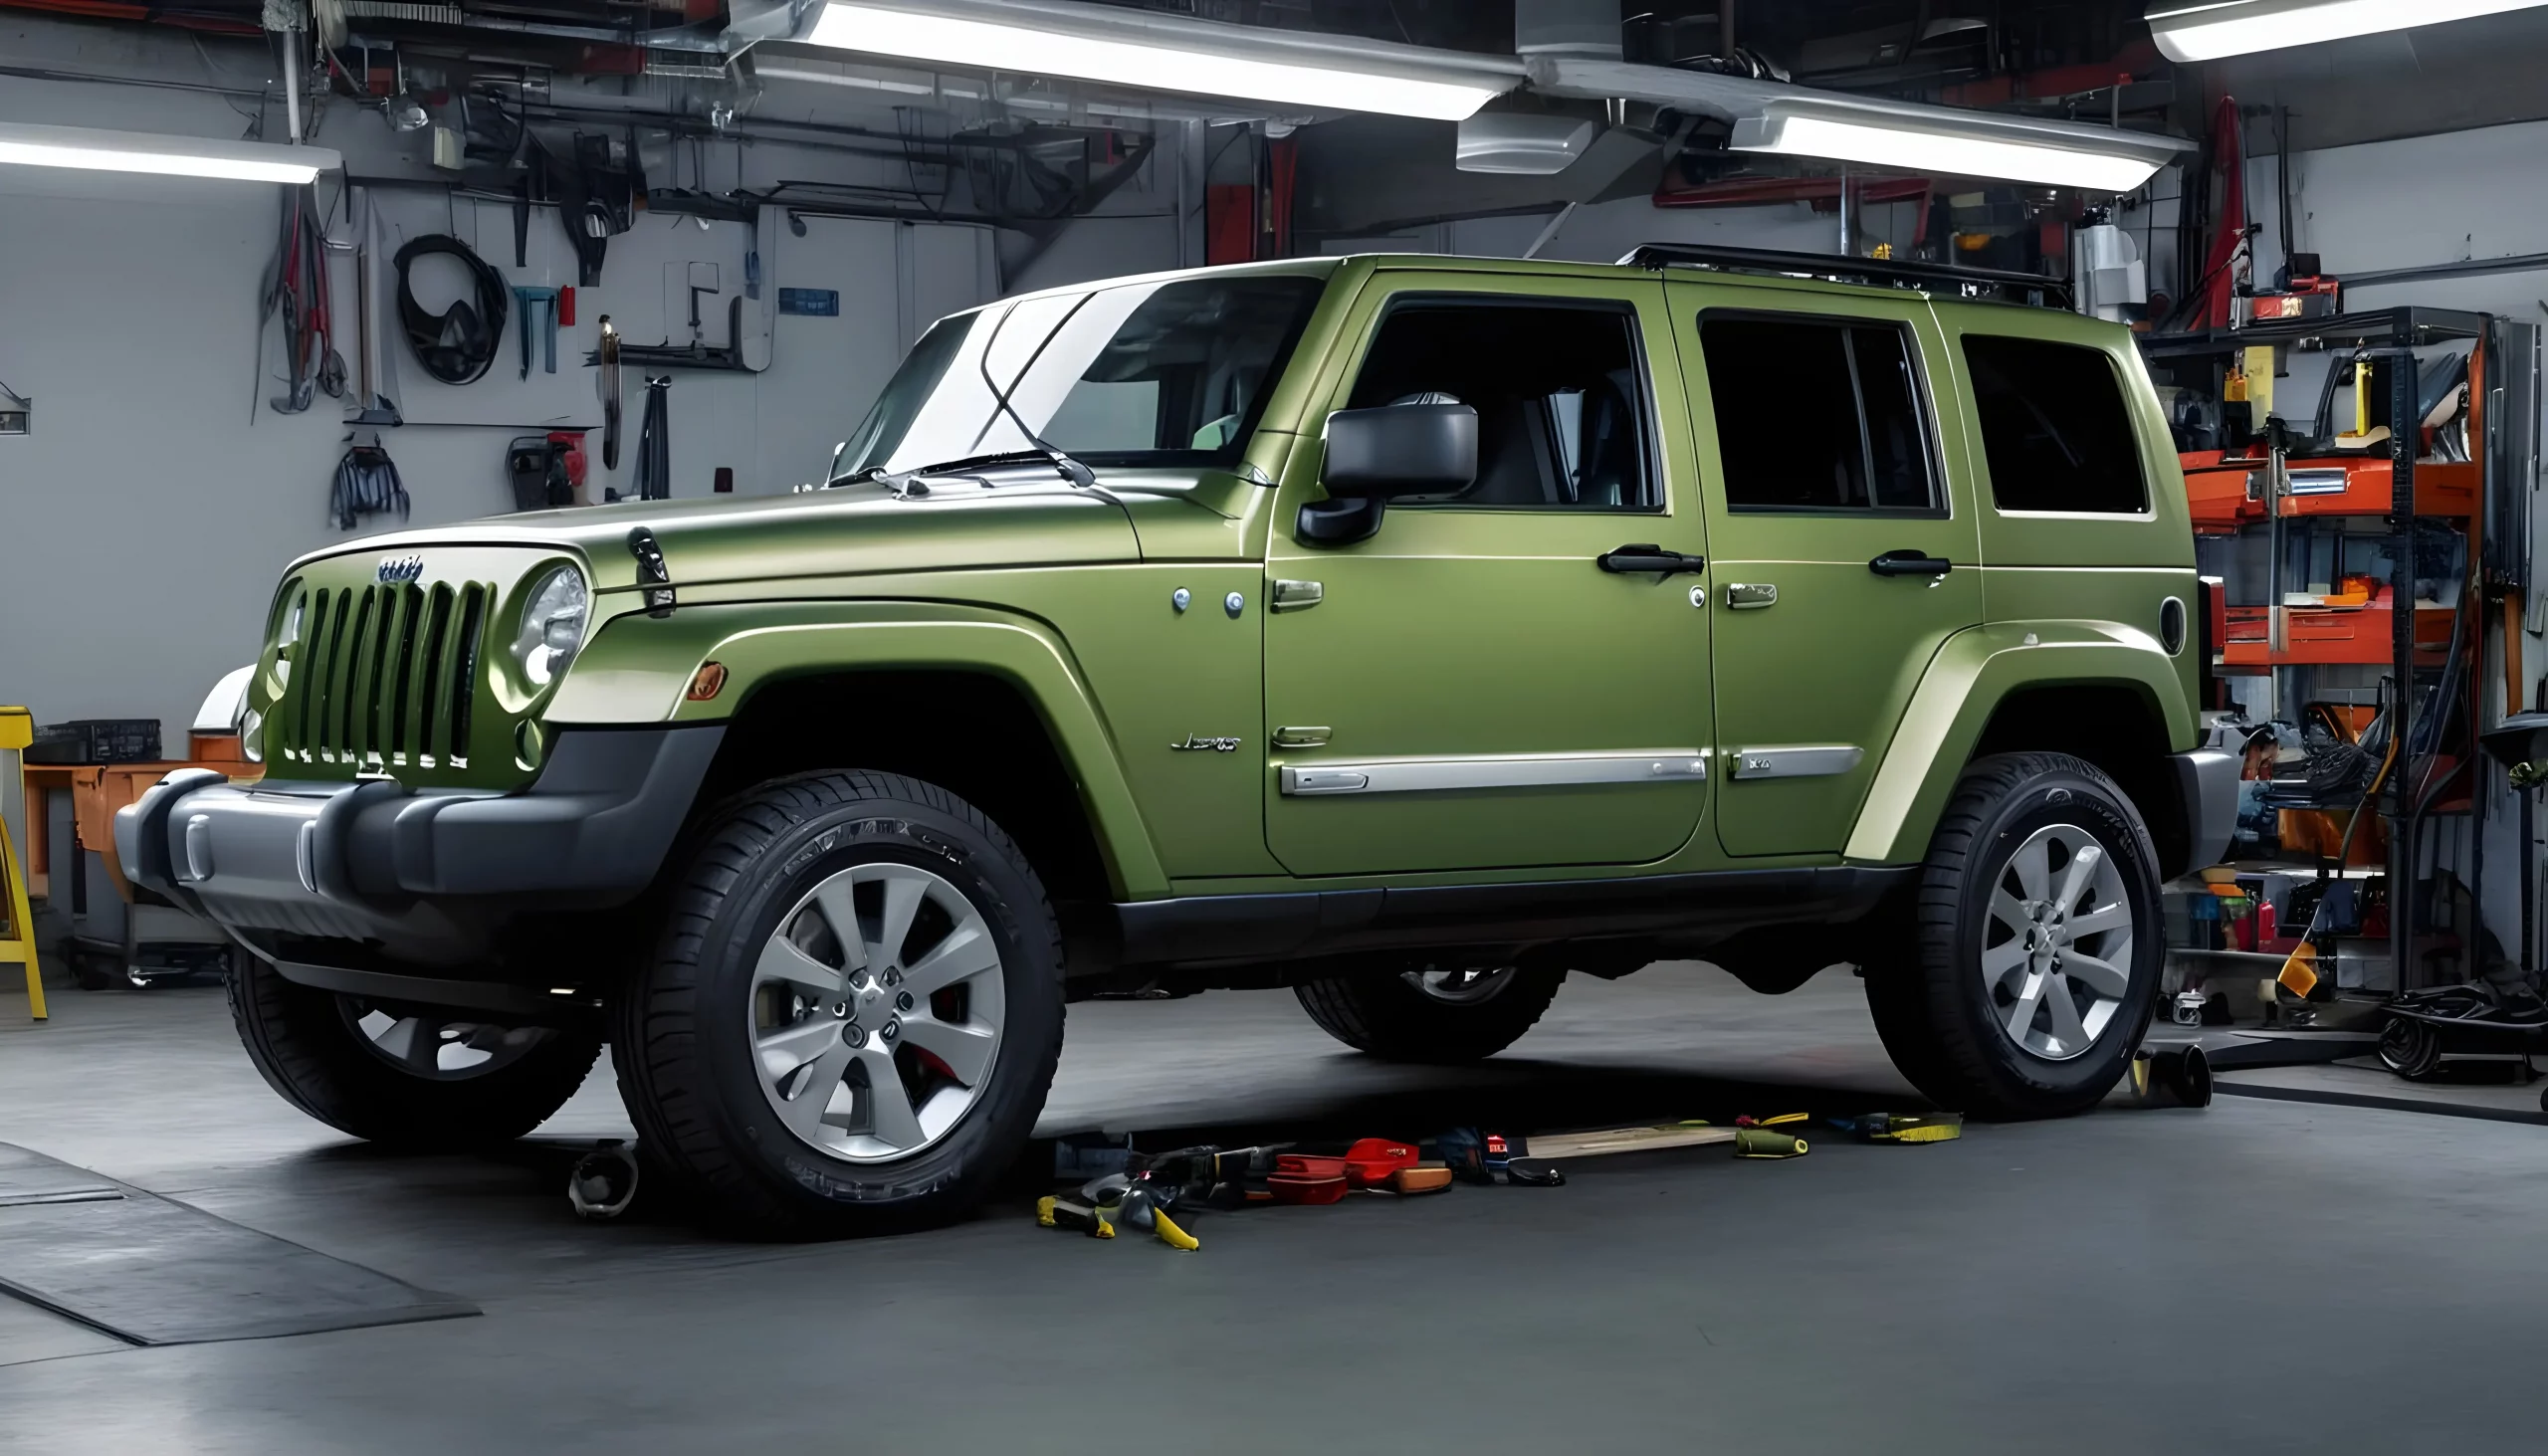 A 2024 Jeep model in a mechanic's garage, surrounded by tools and diagnostic equipment, highlighting the ongoing safety recall checks.